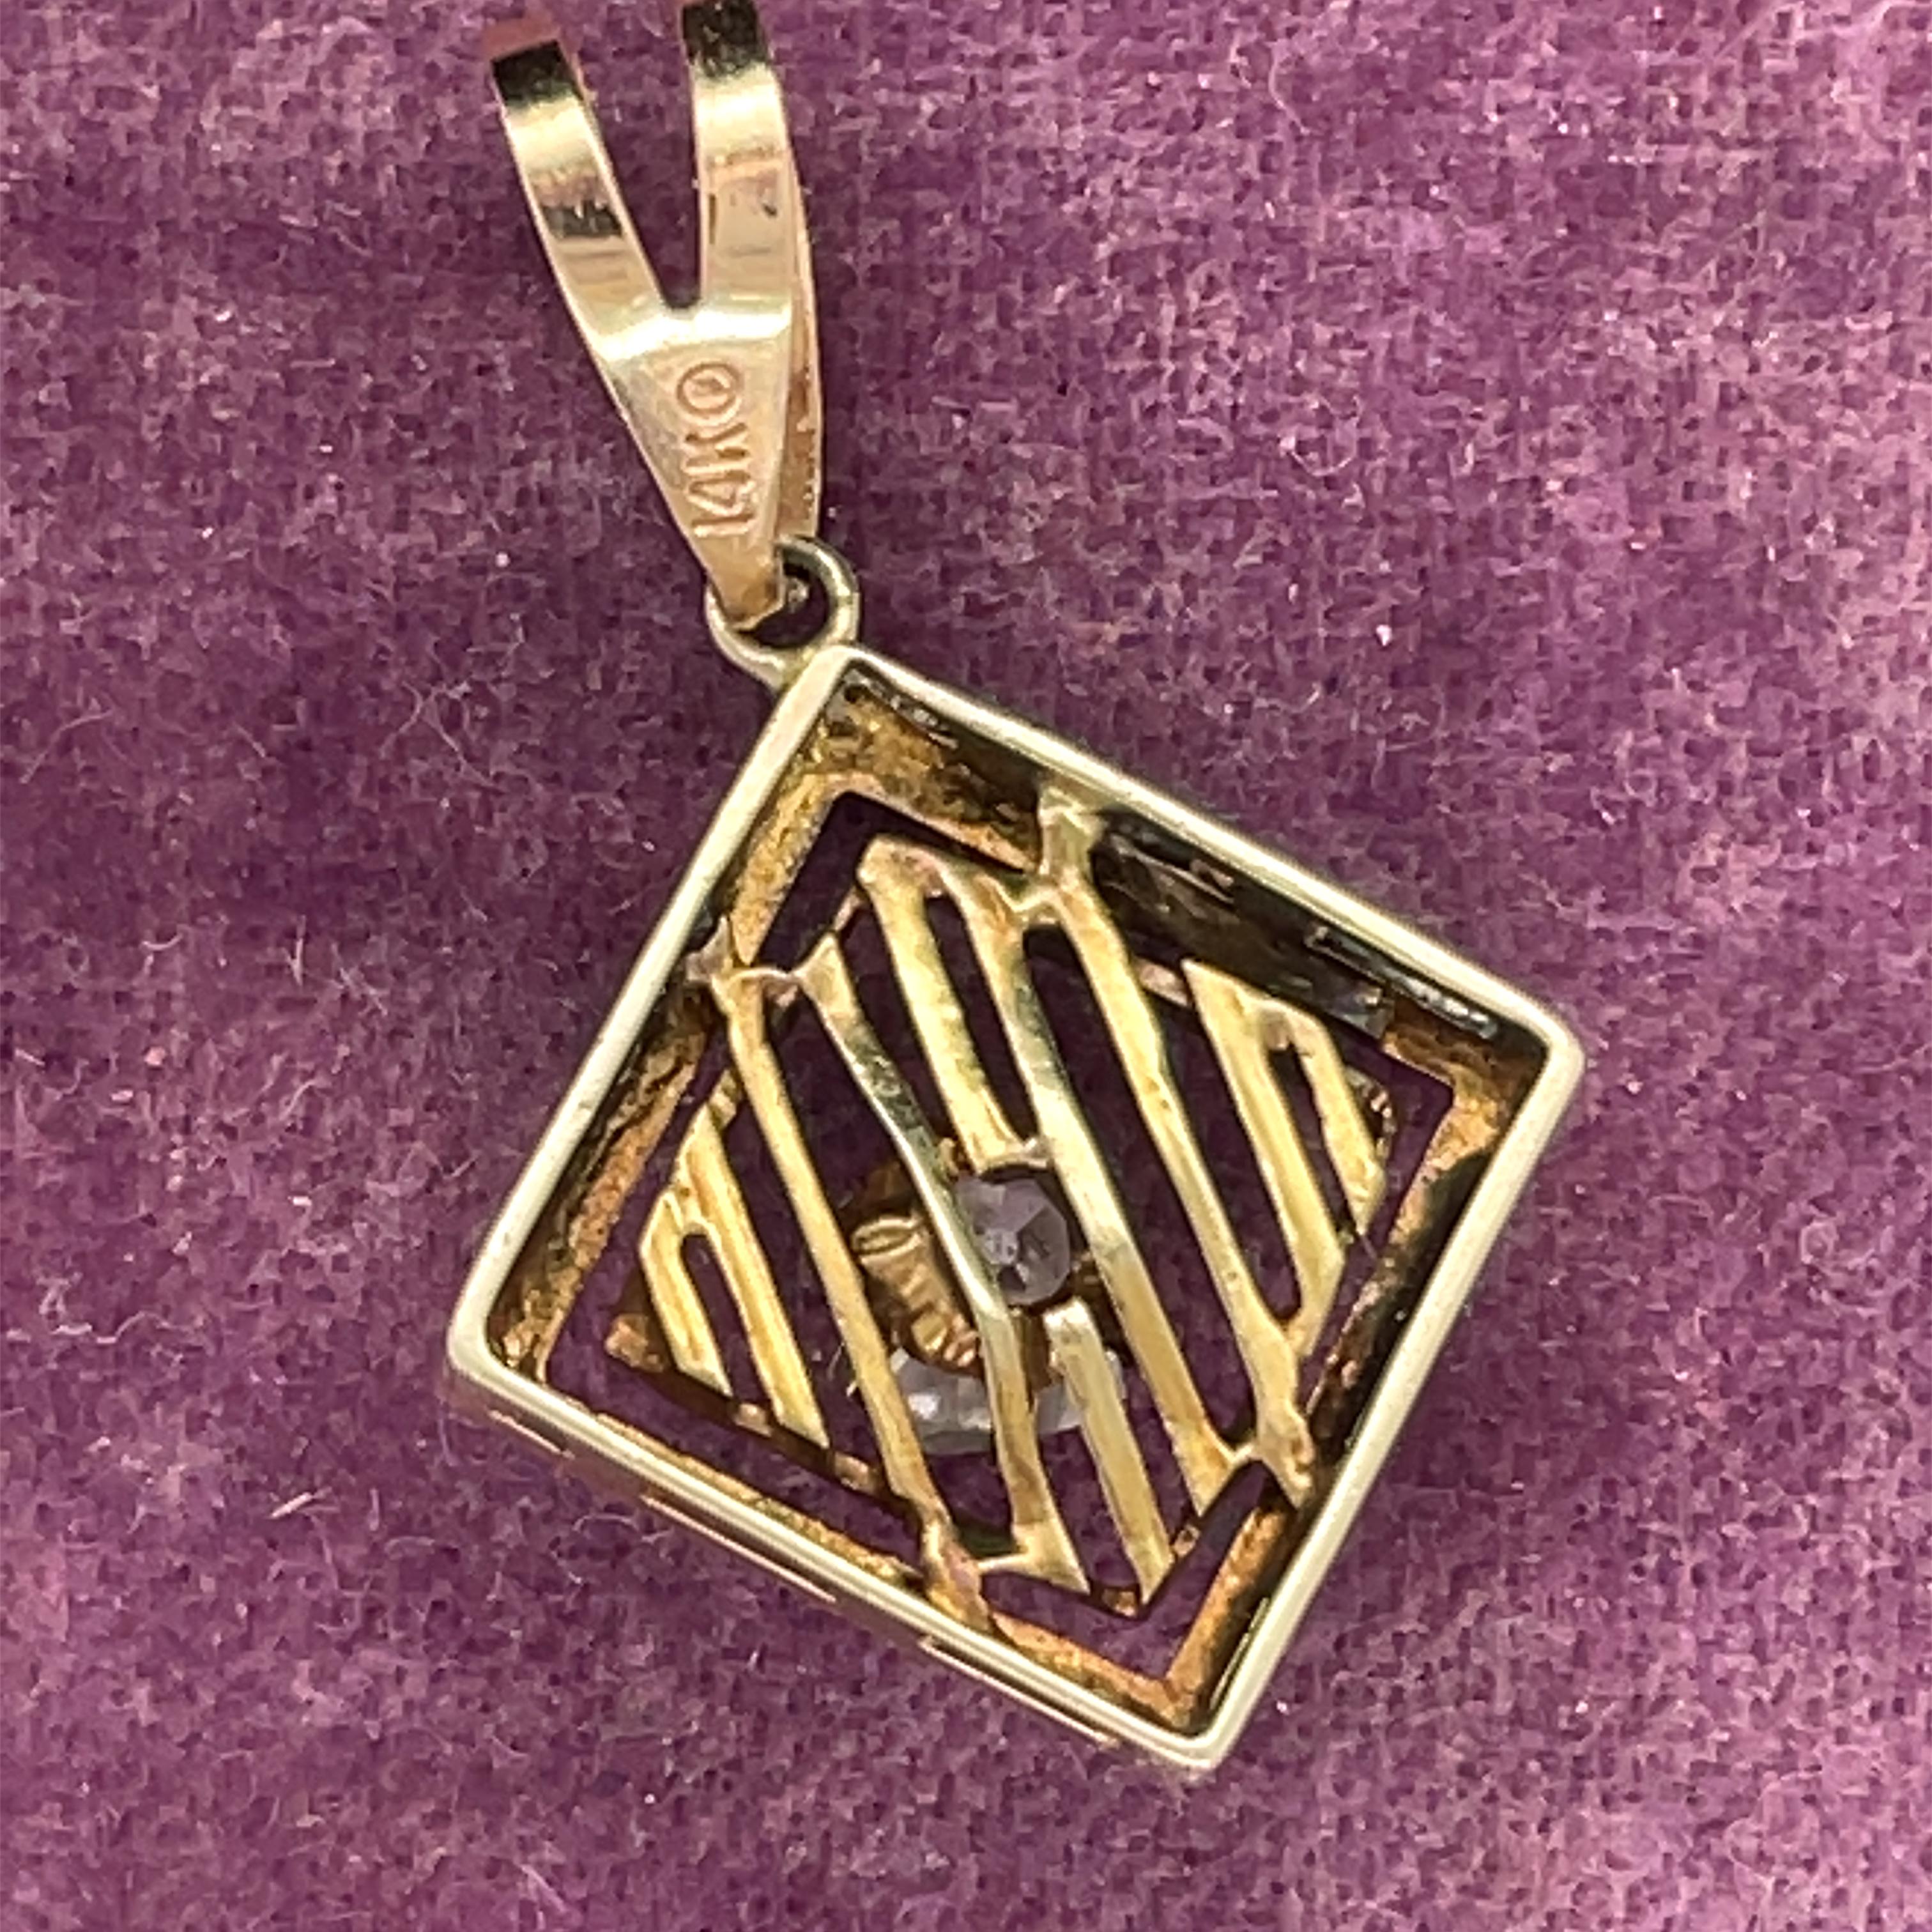 Item Details:
Metal Type: 14K Yellow Gold [Hallmarked, and Tested]
Weight: 1.50 grams

Center Diamond Details:
Weight: .20ct
Cut: Old Mine Brilliant (Antique Cushion)
Color: H
Clarity: VS

Pendant Measurement: .4 inch x .4 inch
Condition: Excellent
